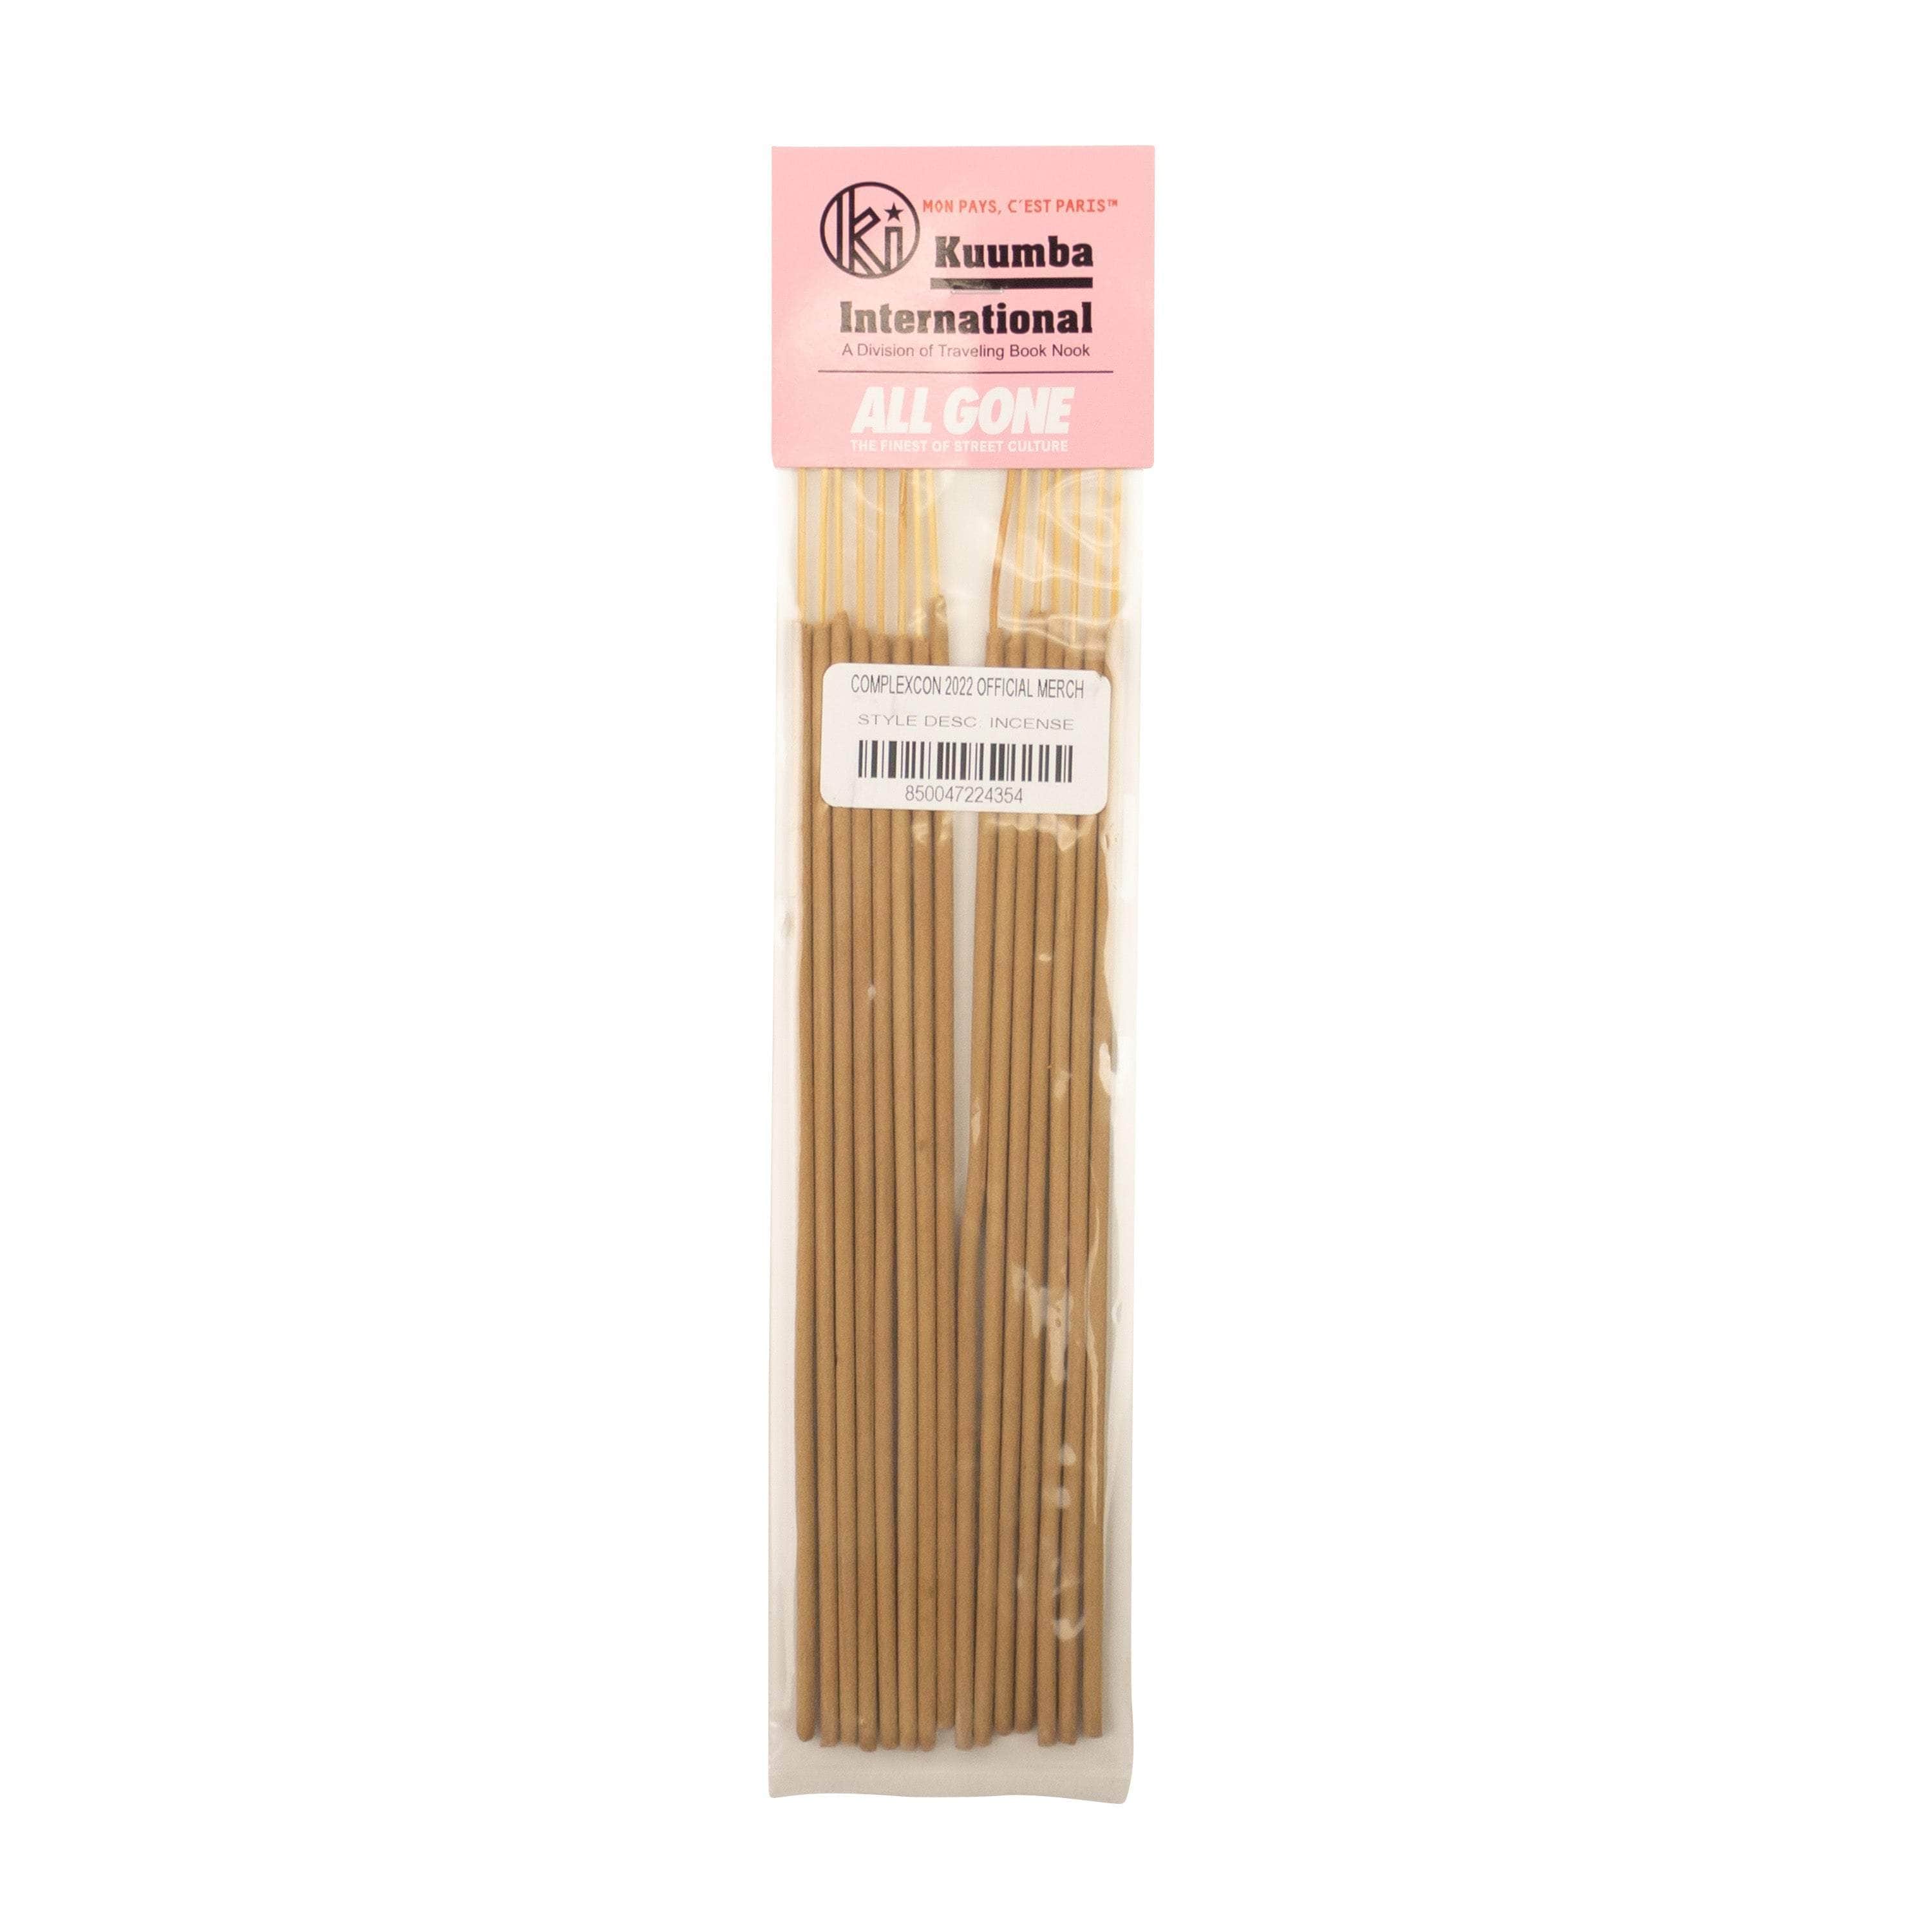 COMPLEXCON X LAMJC channelenable-all, chicmi, complexcon-x-lamjc, couponcollection, gender-mens, gender-womens, kitchen-decor, main-accessories, mens-shoes, size-os, under-250 OS Brown Kuumba All Gone Incense Sticks CXN-XACC-0001/OS CXN-XACC-0001/OS